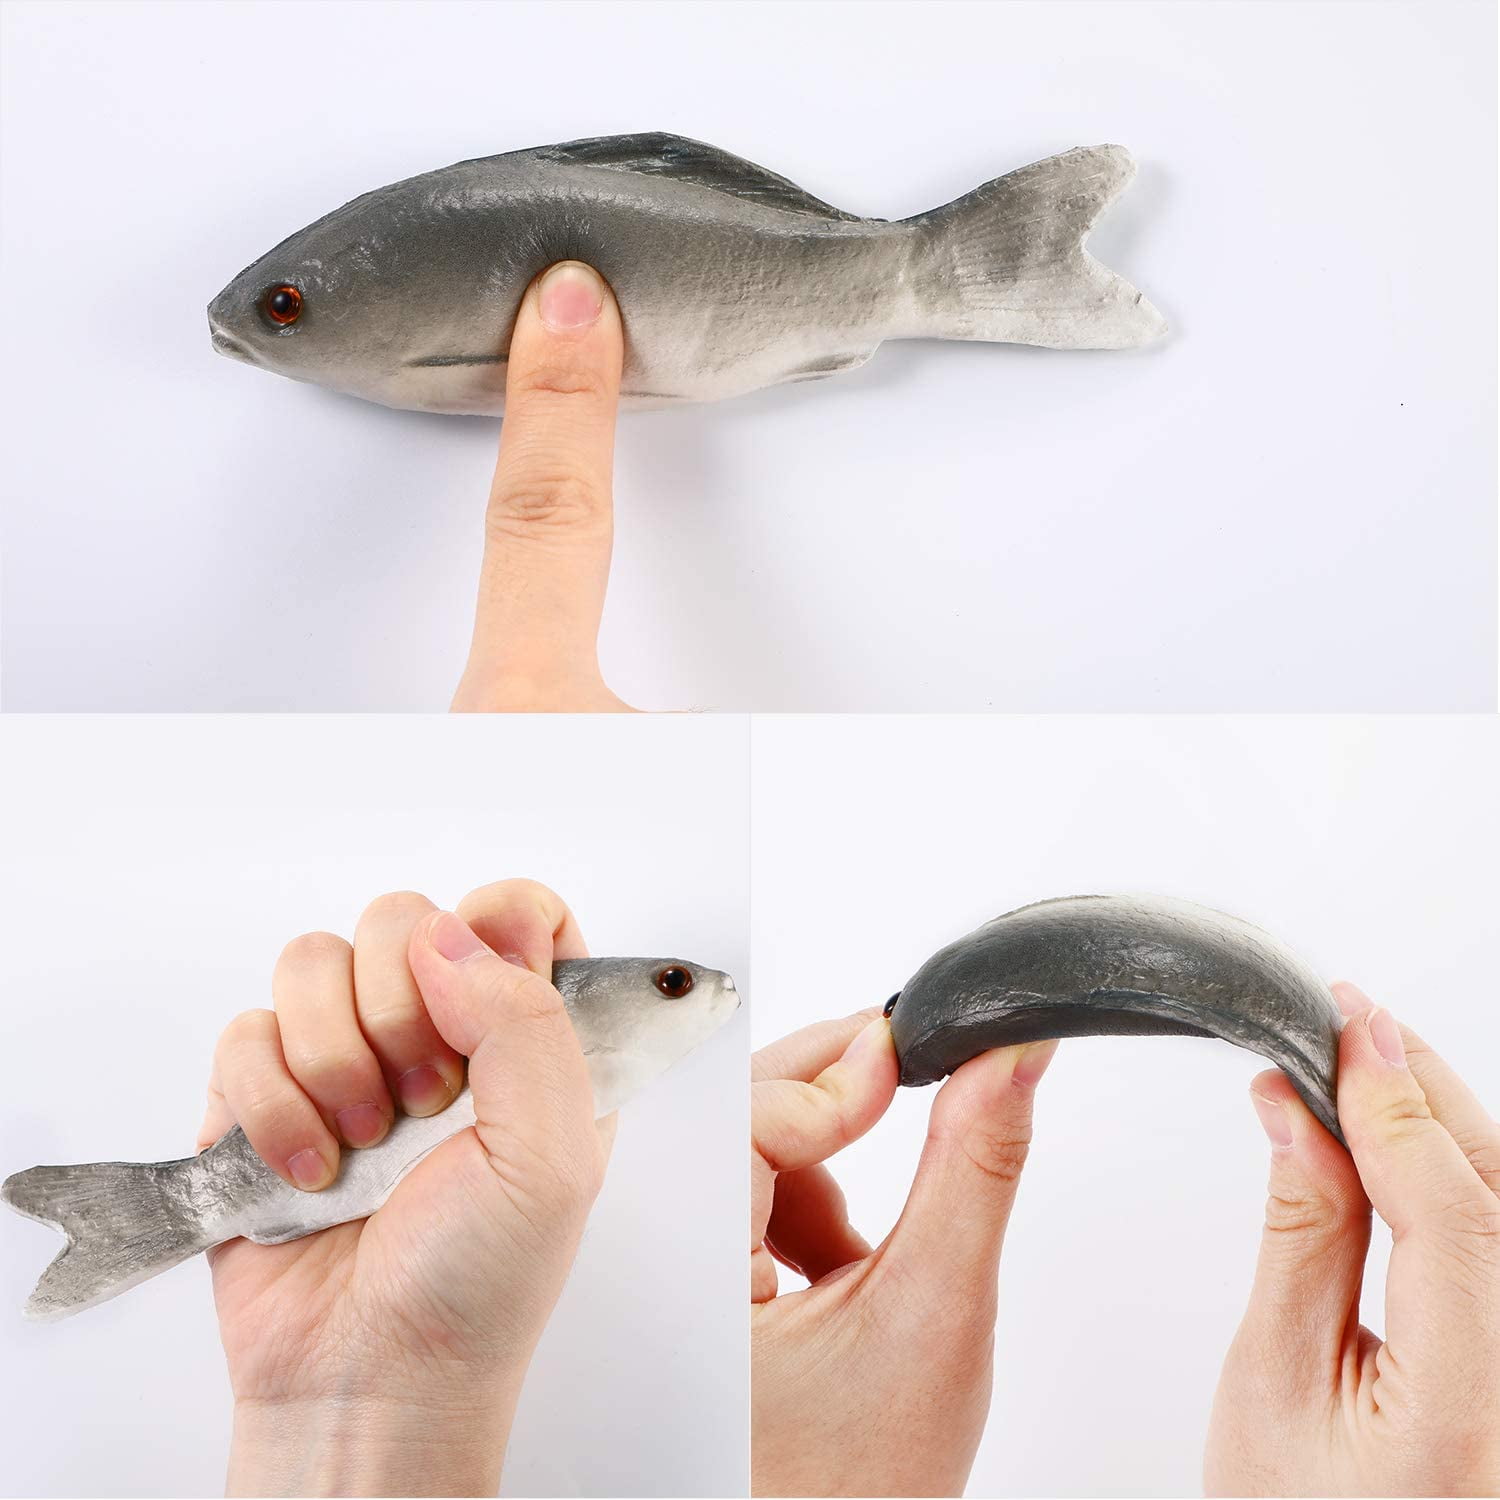 020-2 HT 3PCS Simulated Fish Artificial Fish Model Lifelike Fake Fish for Home Party Market Display Kids Toy Kitchen Decoration Photography Props 